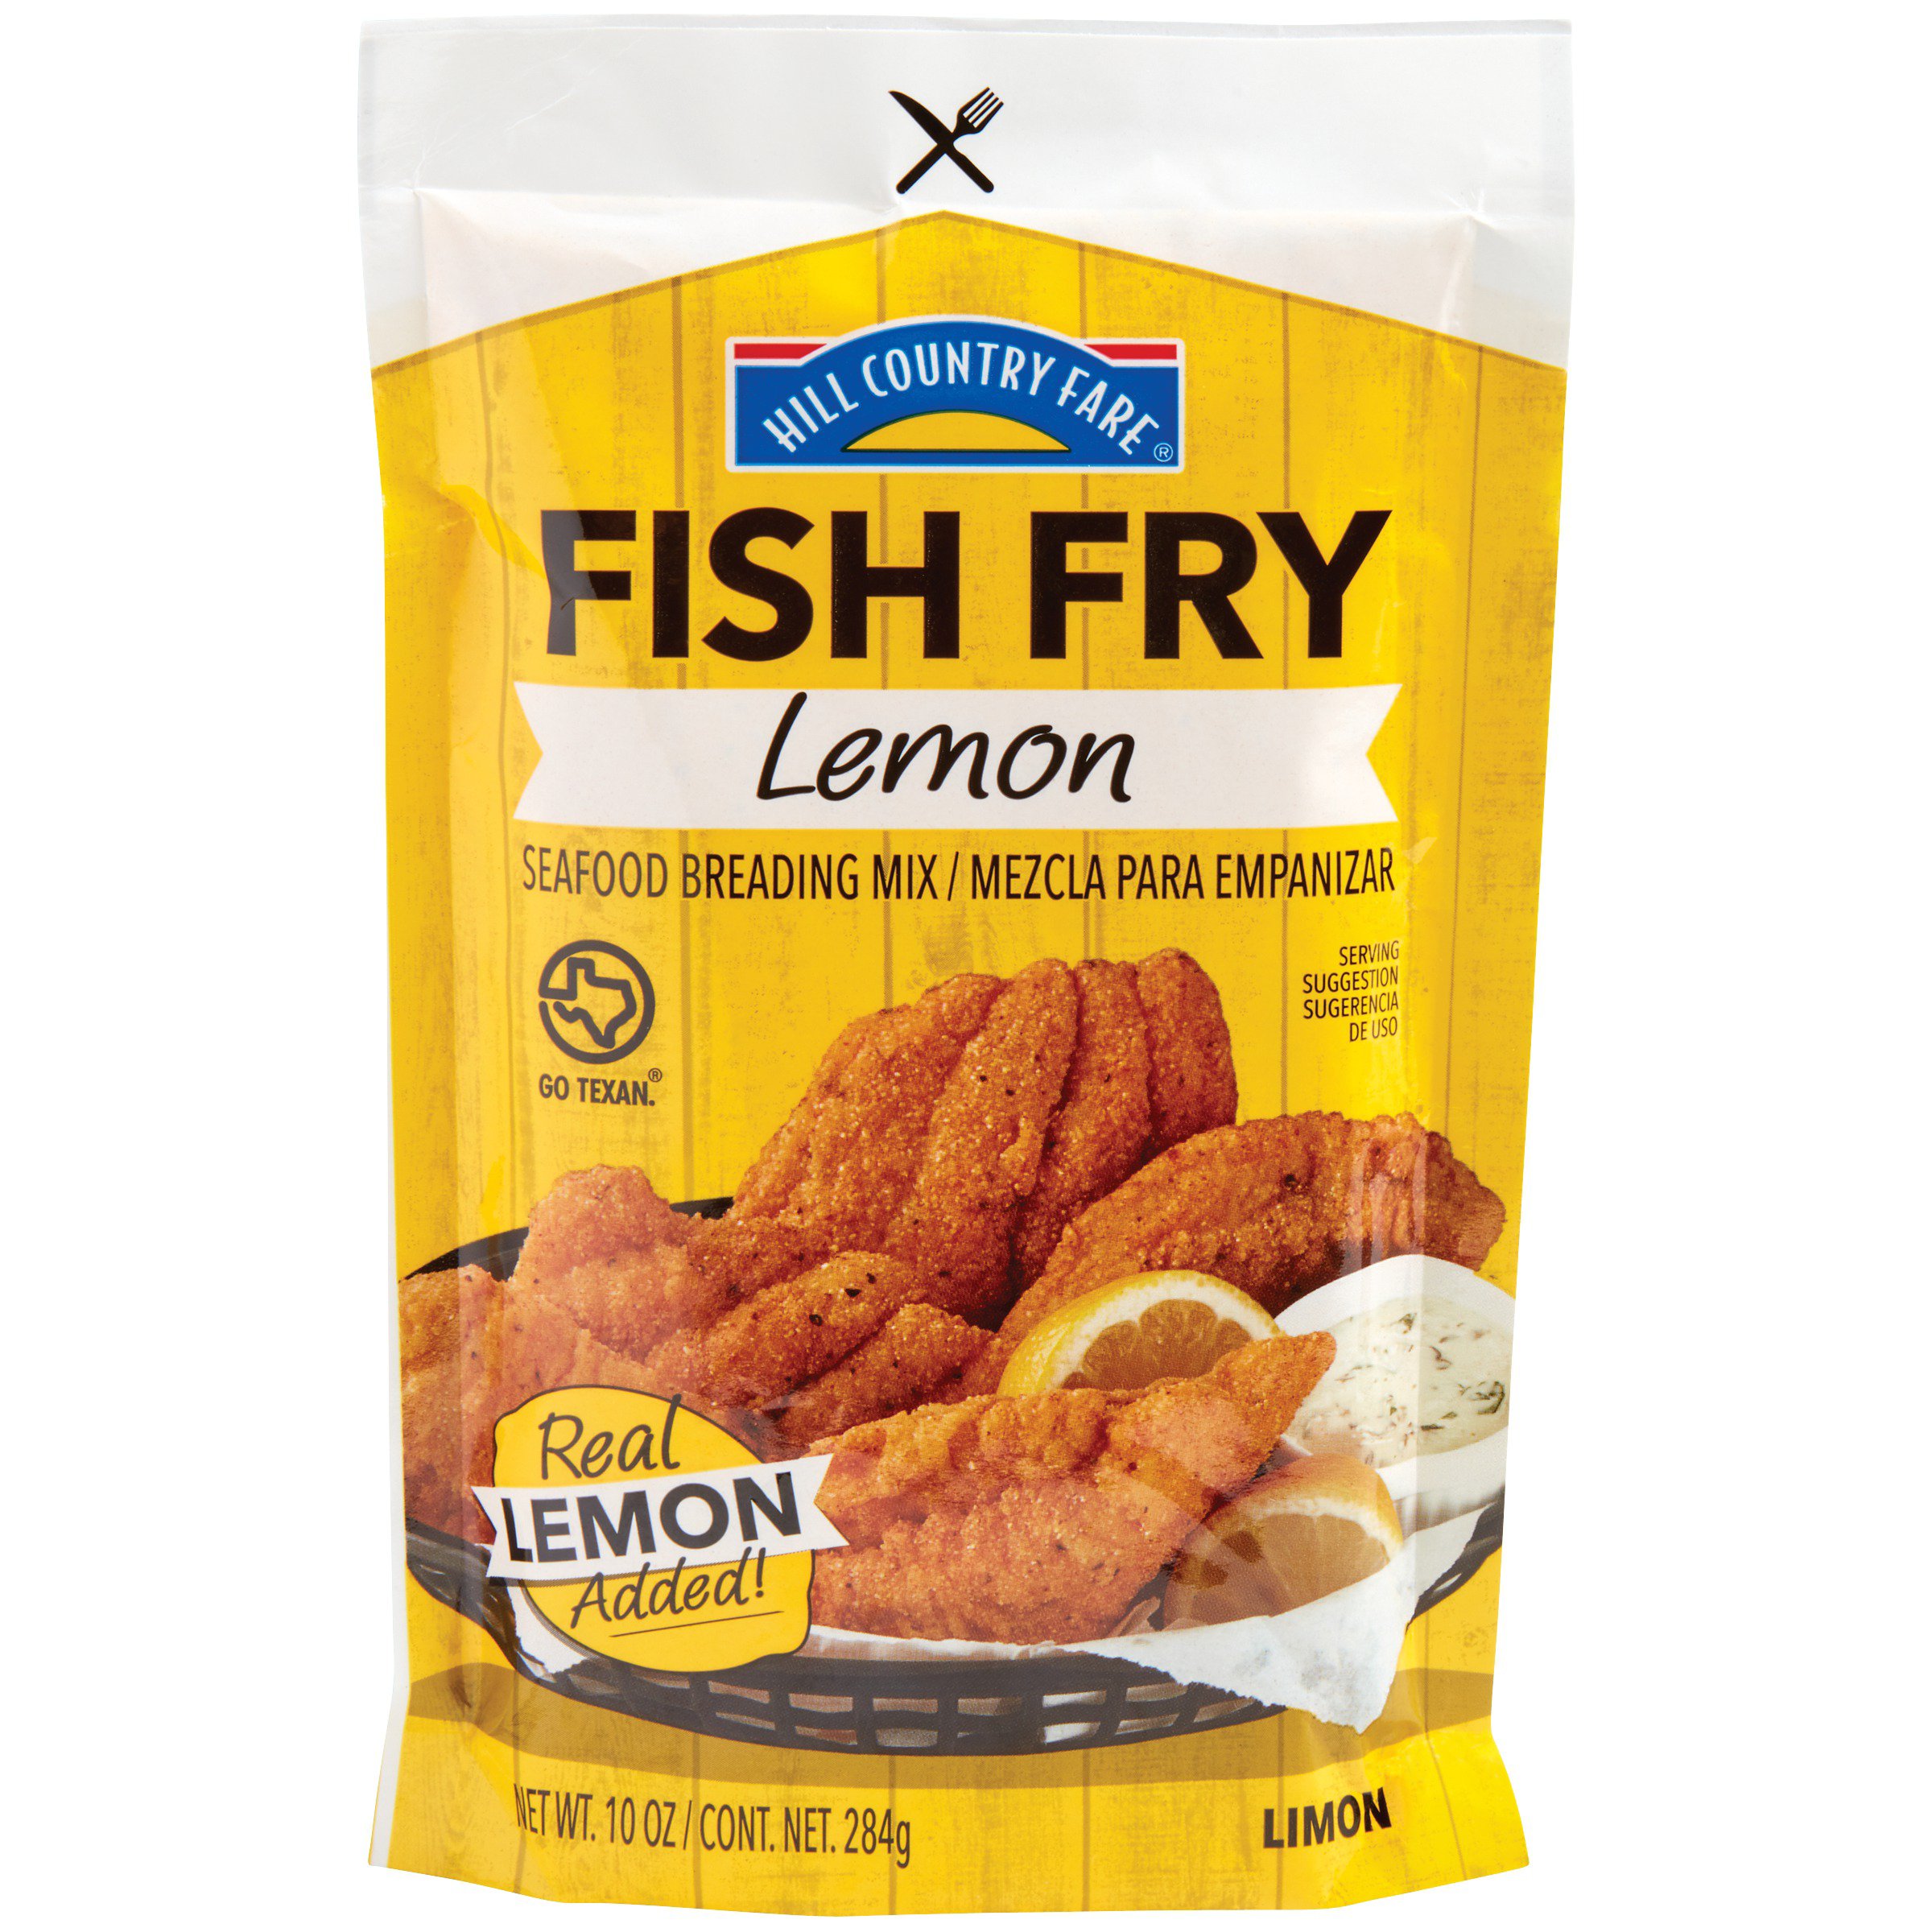 Hill Country Fare Lemon Pepper - Shop Herbs & Spices at H-E-B